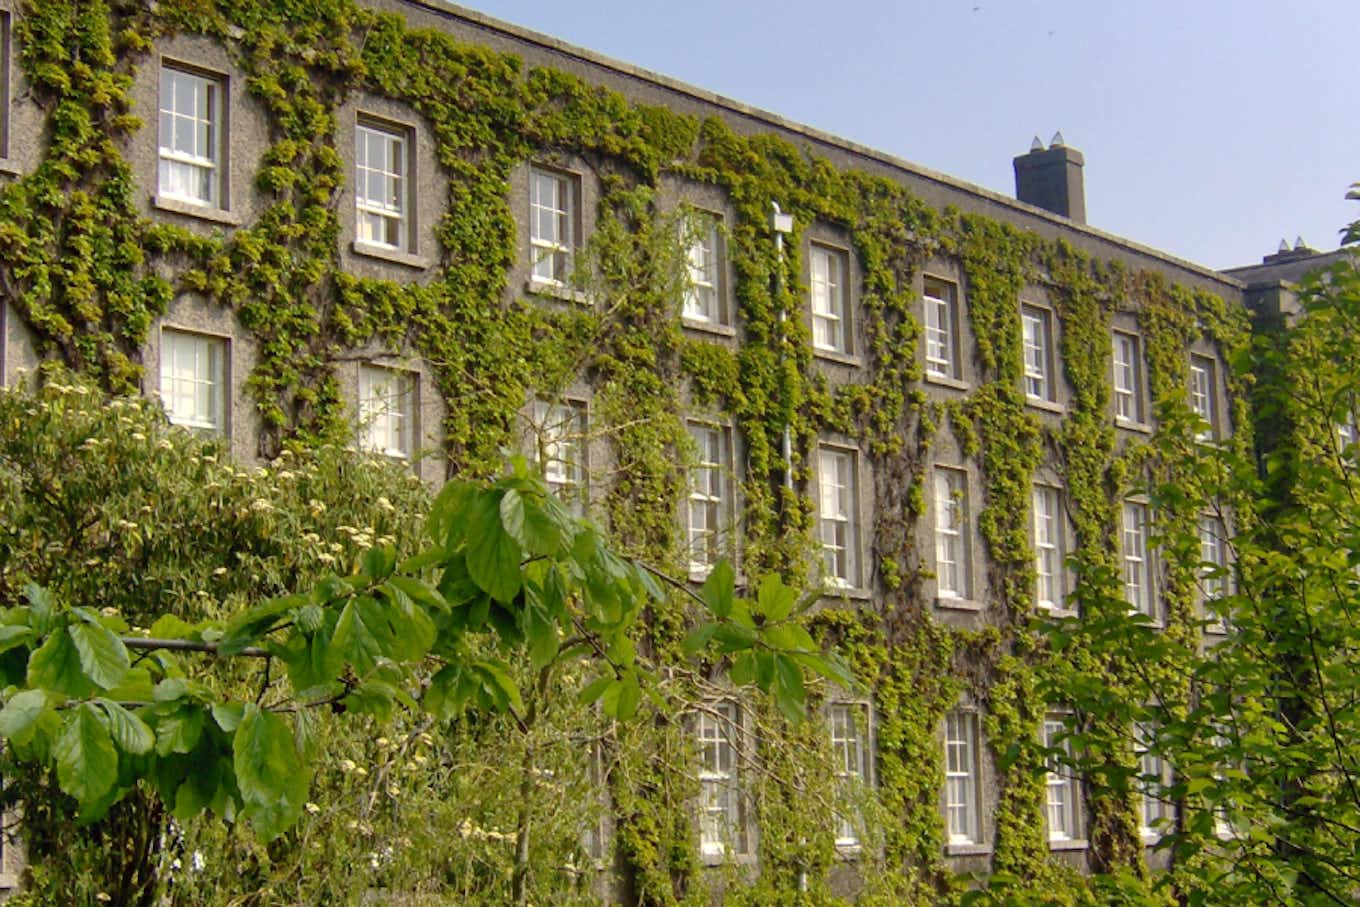 Building covered in ivy